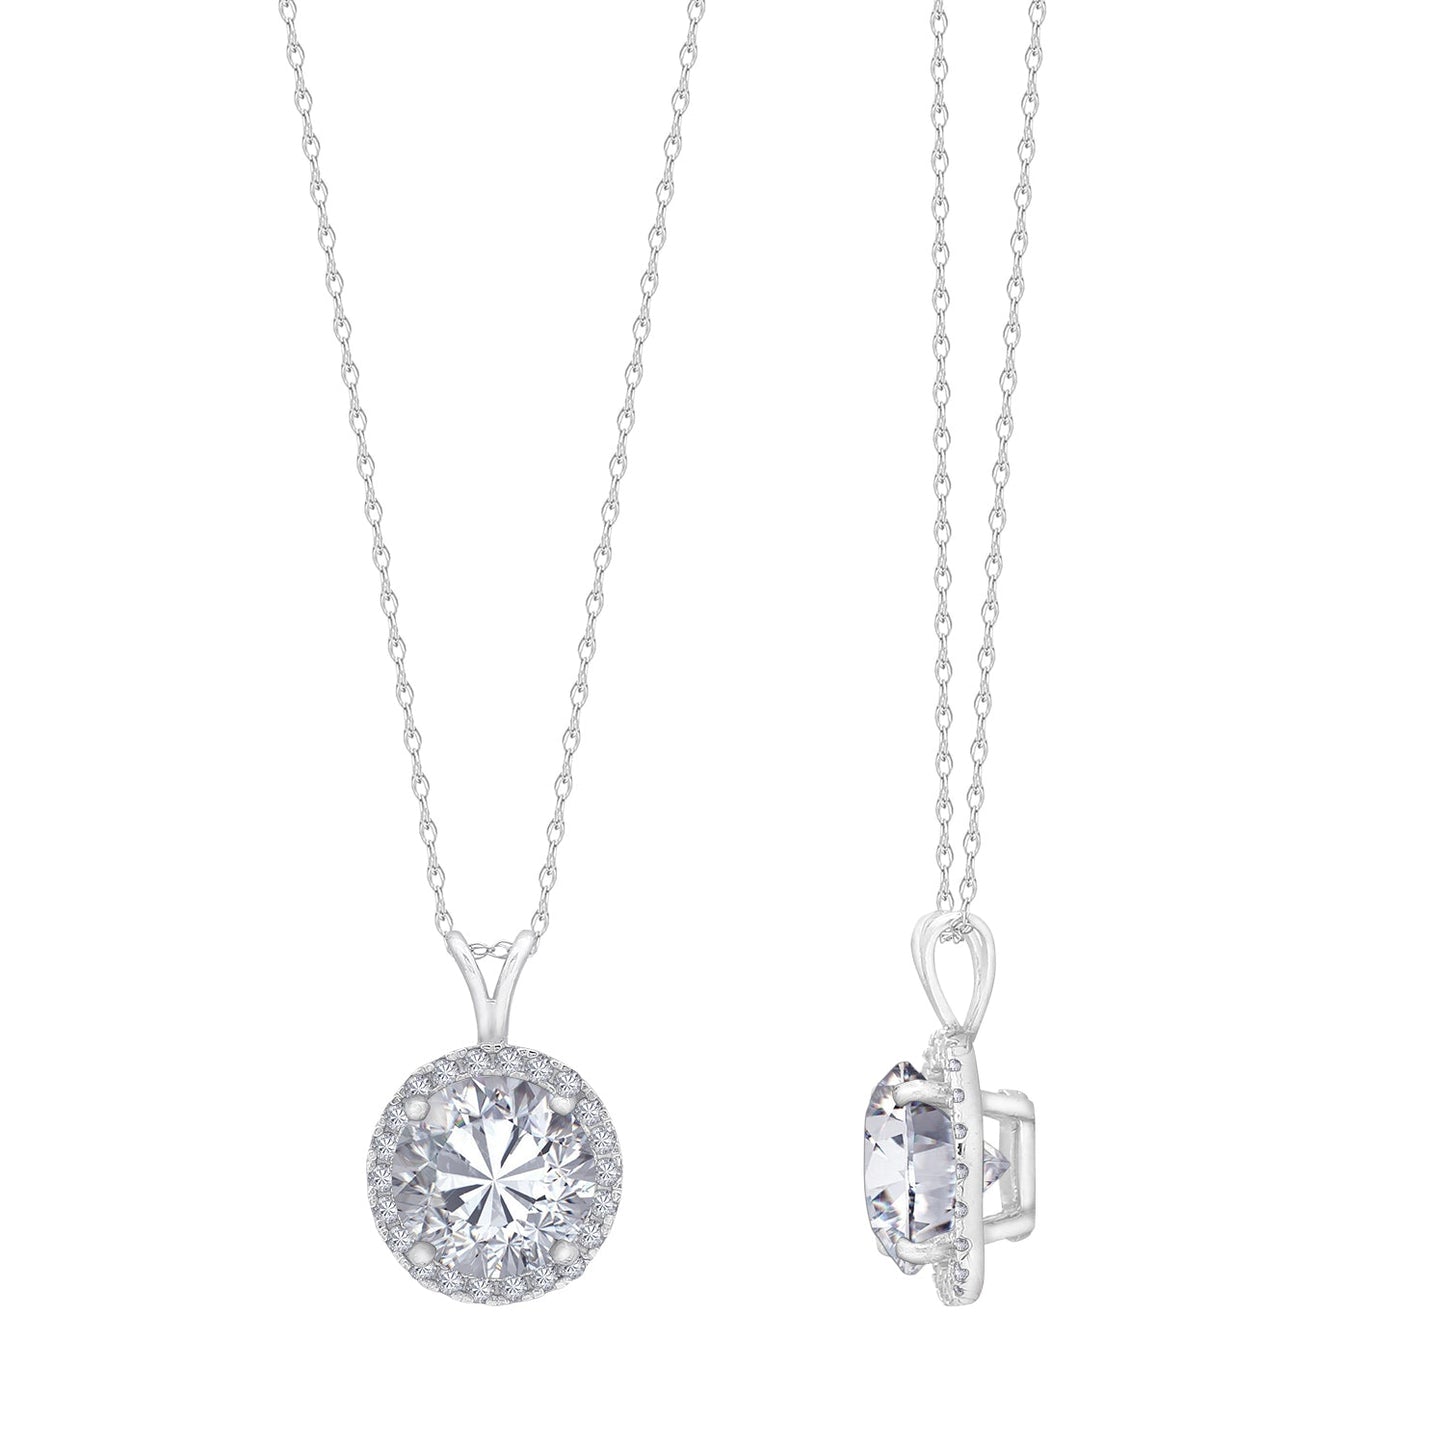 3 Cttw Round Halo Pendant with Chain